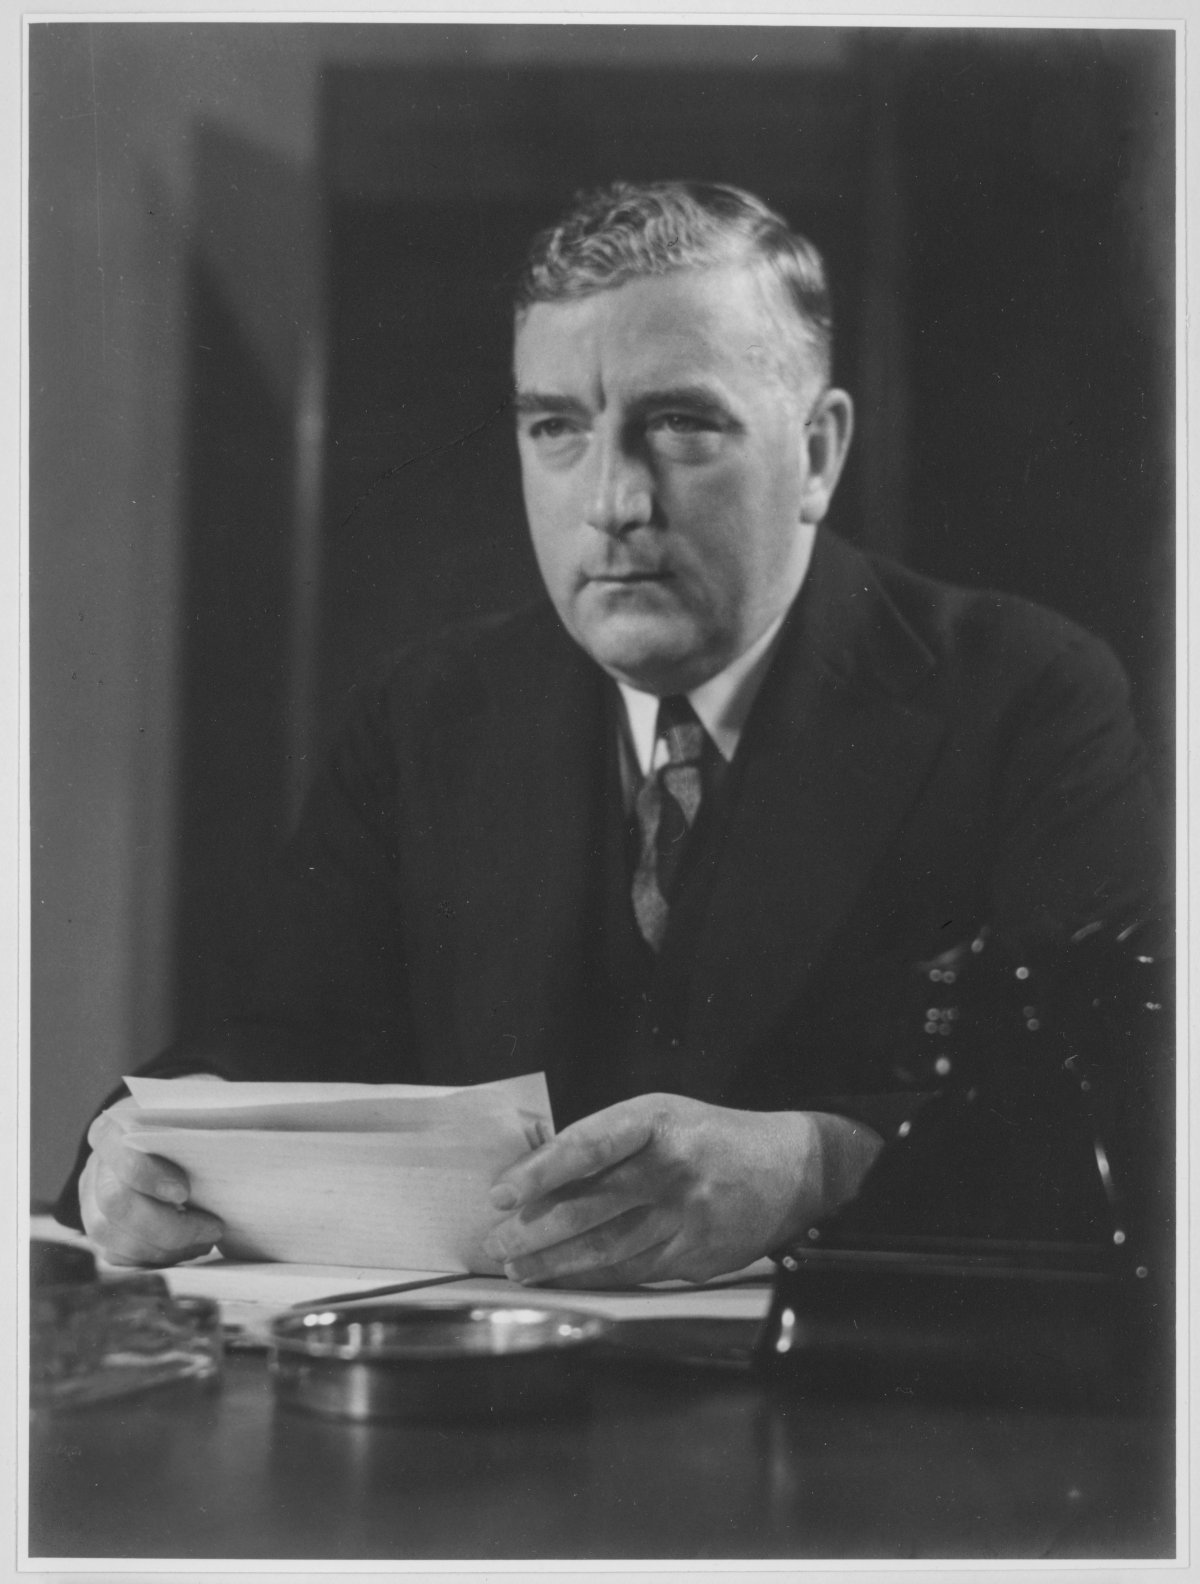 Australian Prime Minister Robert Menzies sits at a desk holding several pieces of paper. He is looking melancholic and stares off camera to the left. He is a middle-aged white man with blonde hair swept to one side. He wears a dark suit and tie with a dark tie. There is a black Bakelite telephone on the table in front of him